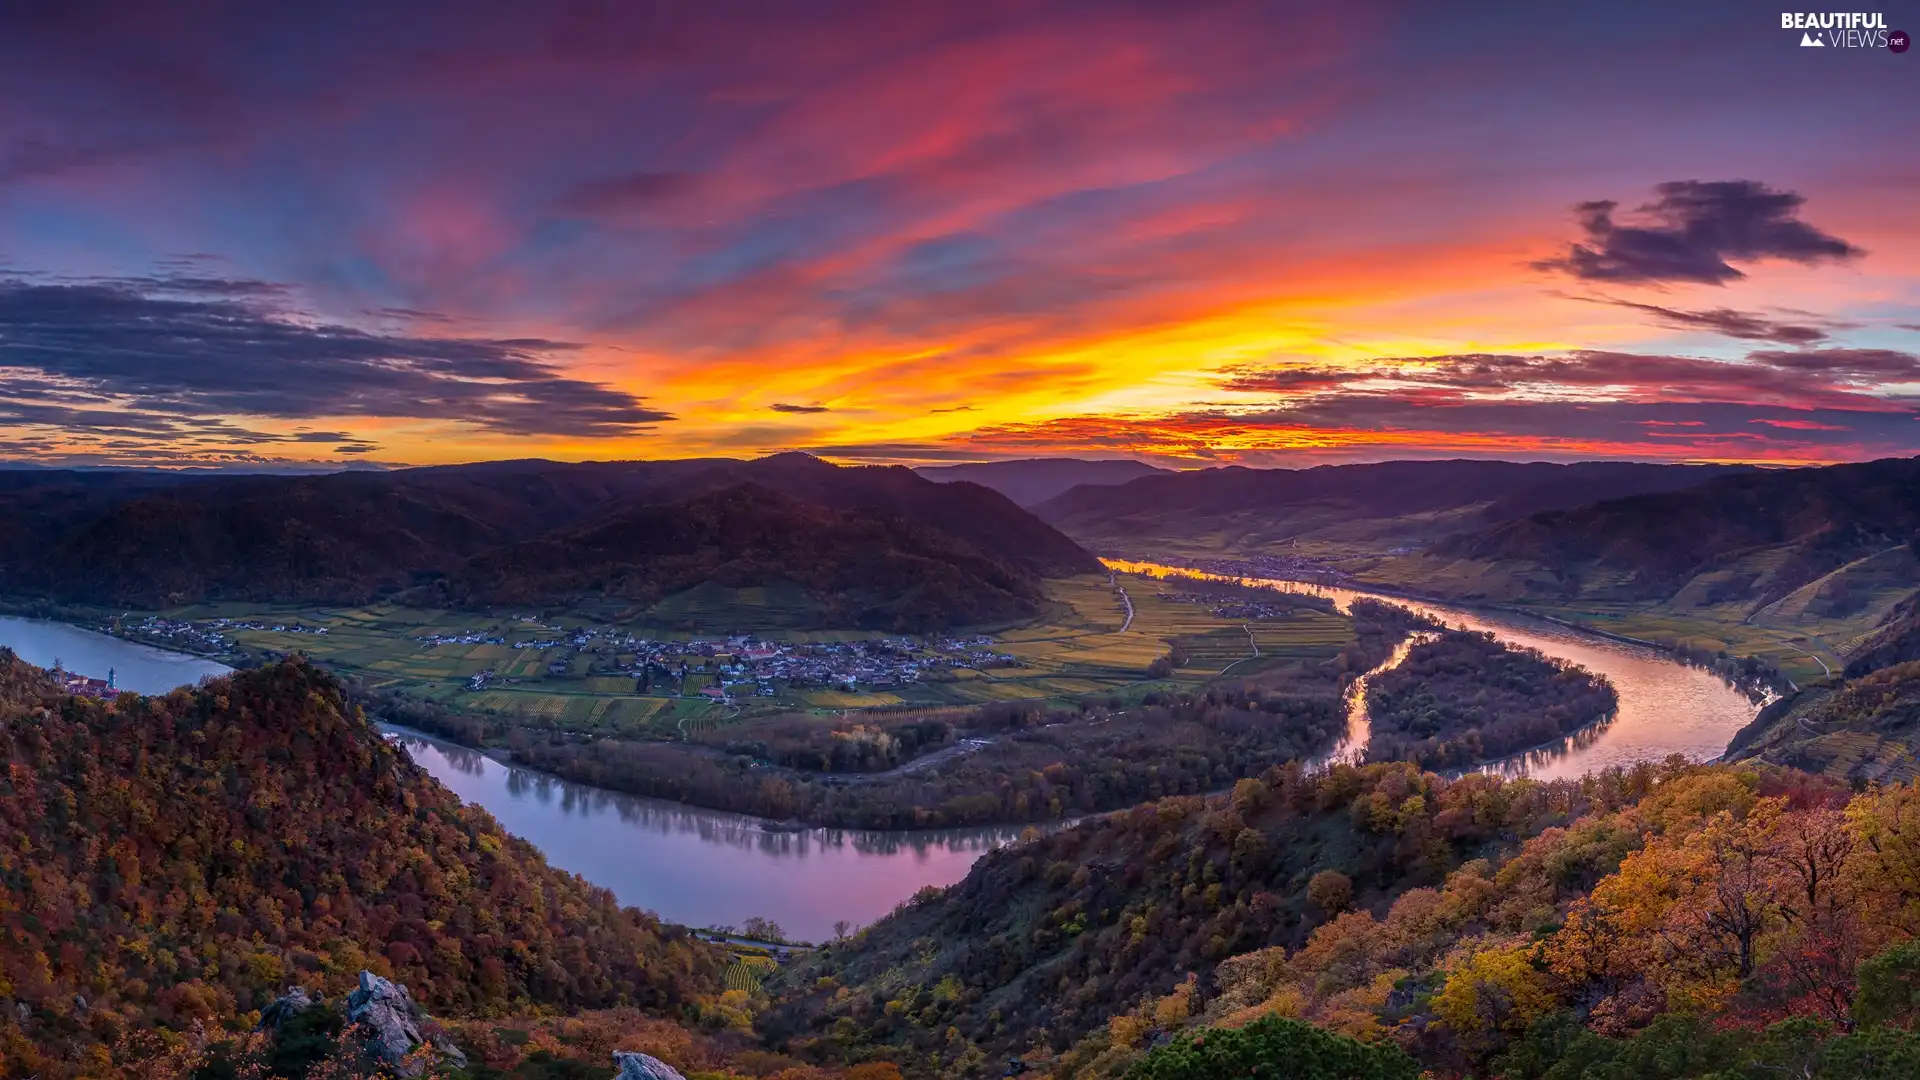 viewes, River, Houses, trees, Mountains, woods, Great Sunsets